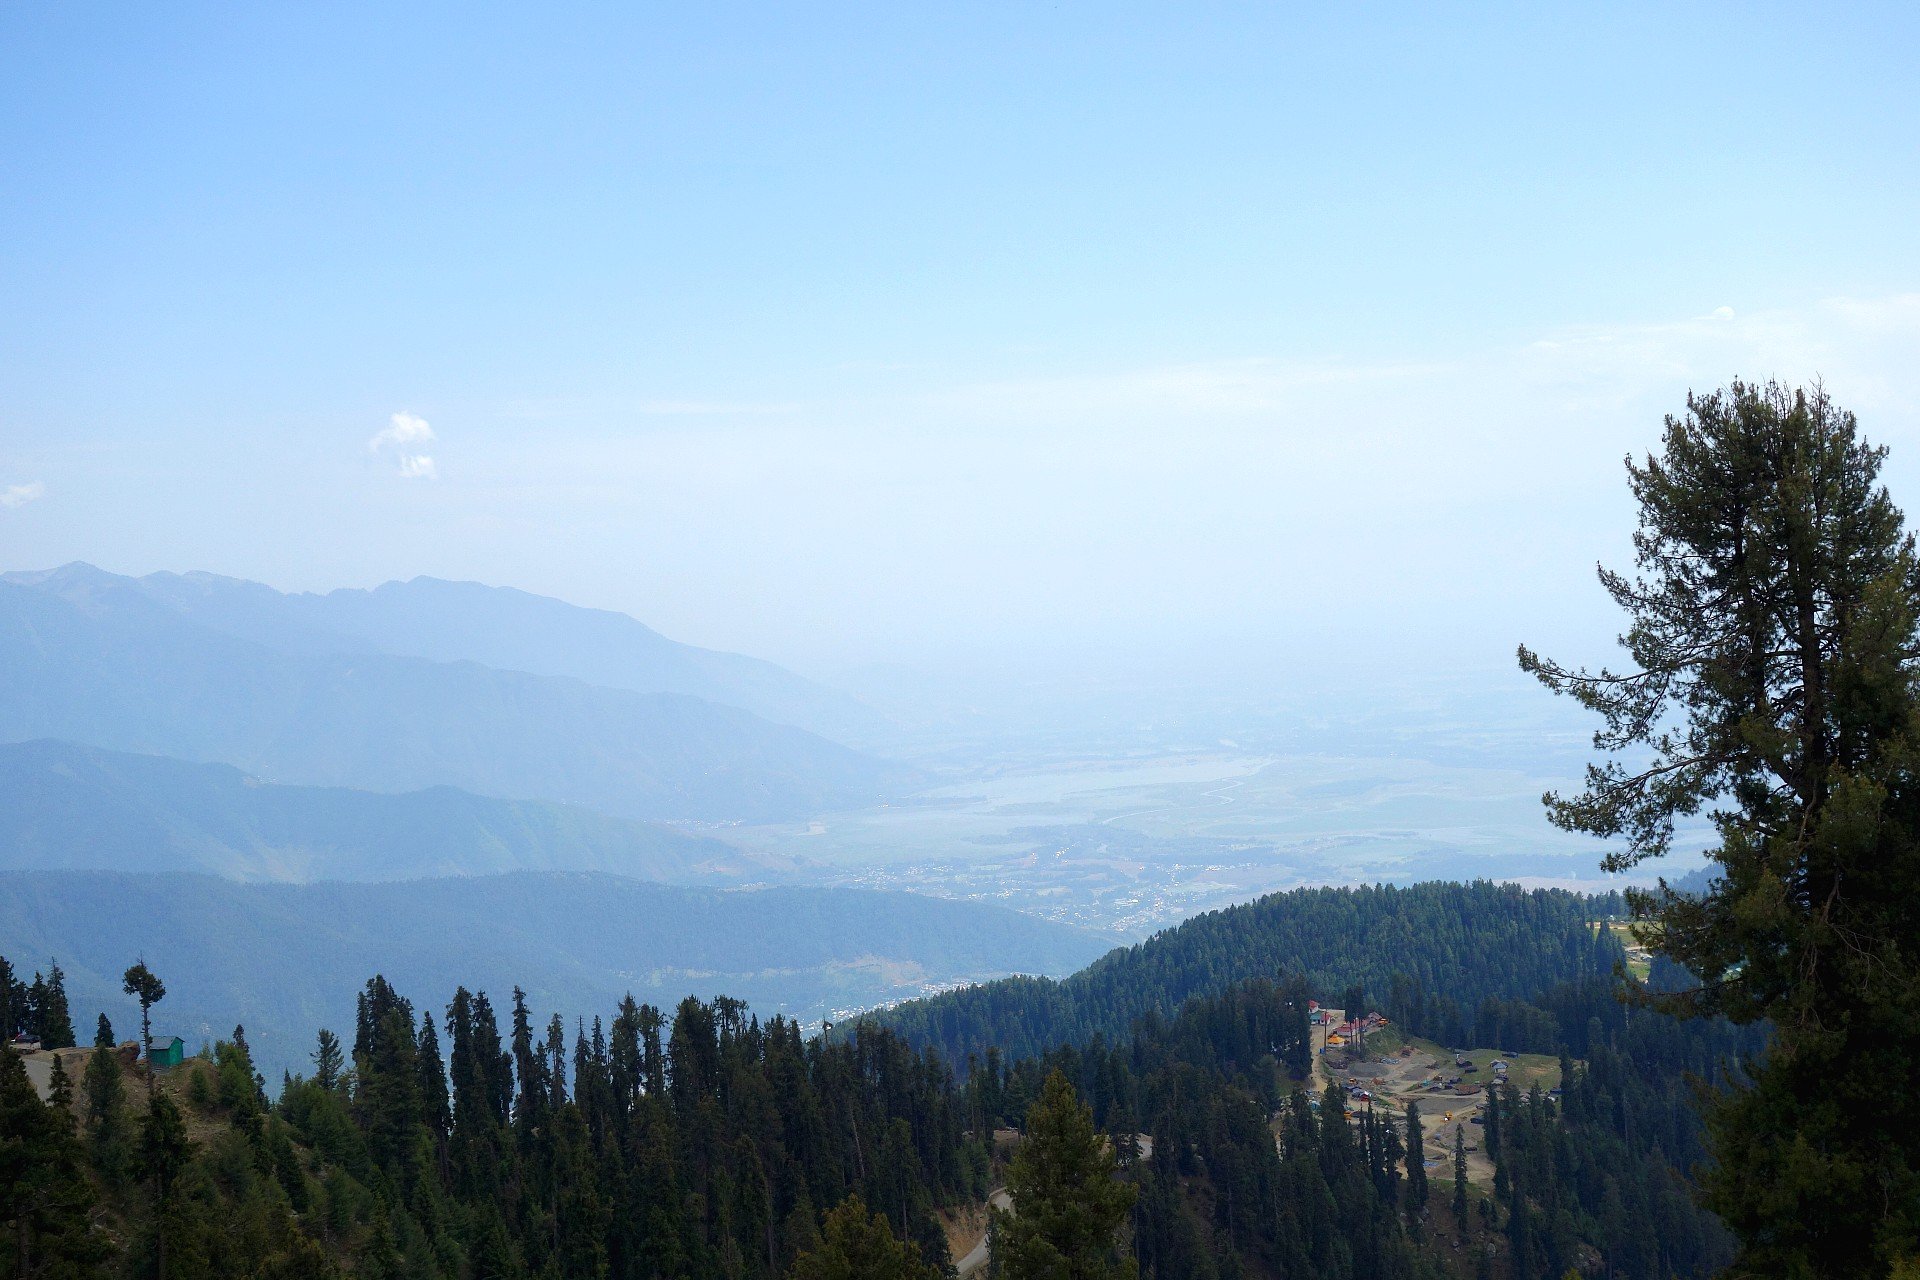 The Kashmir Valley on a Hazy Day